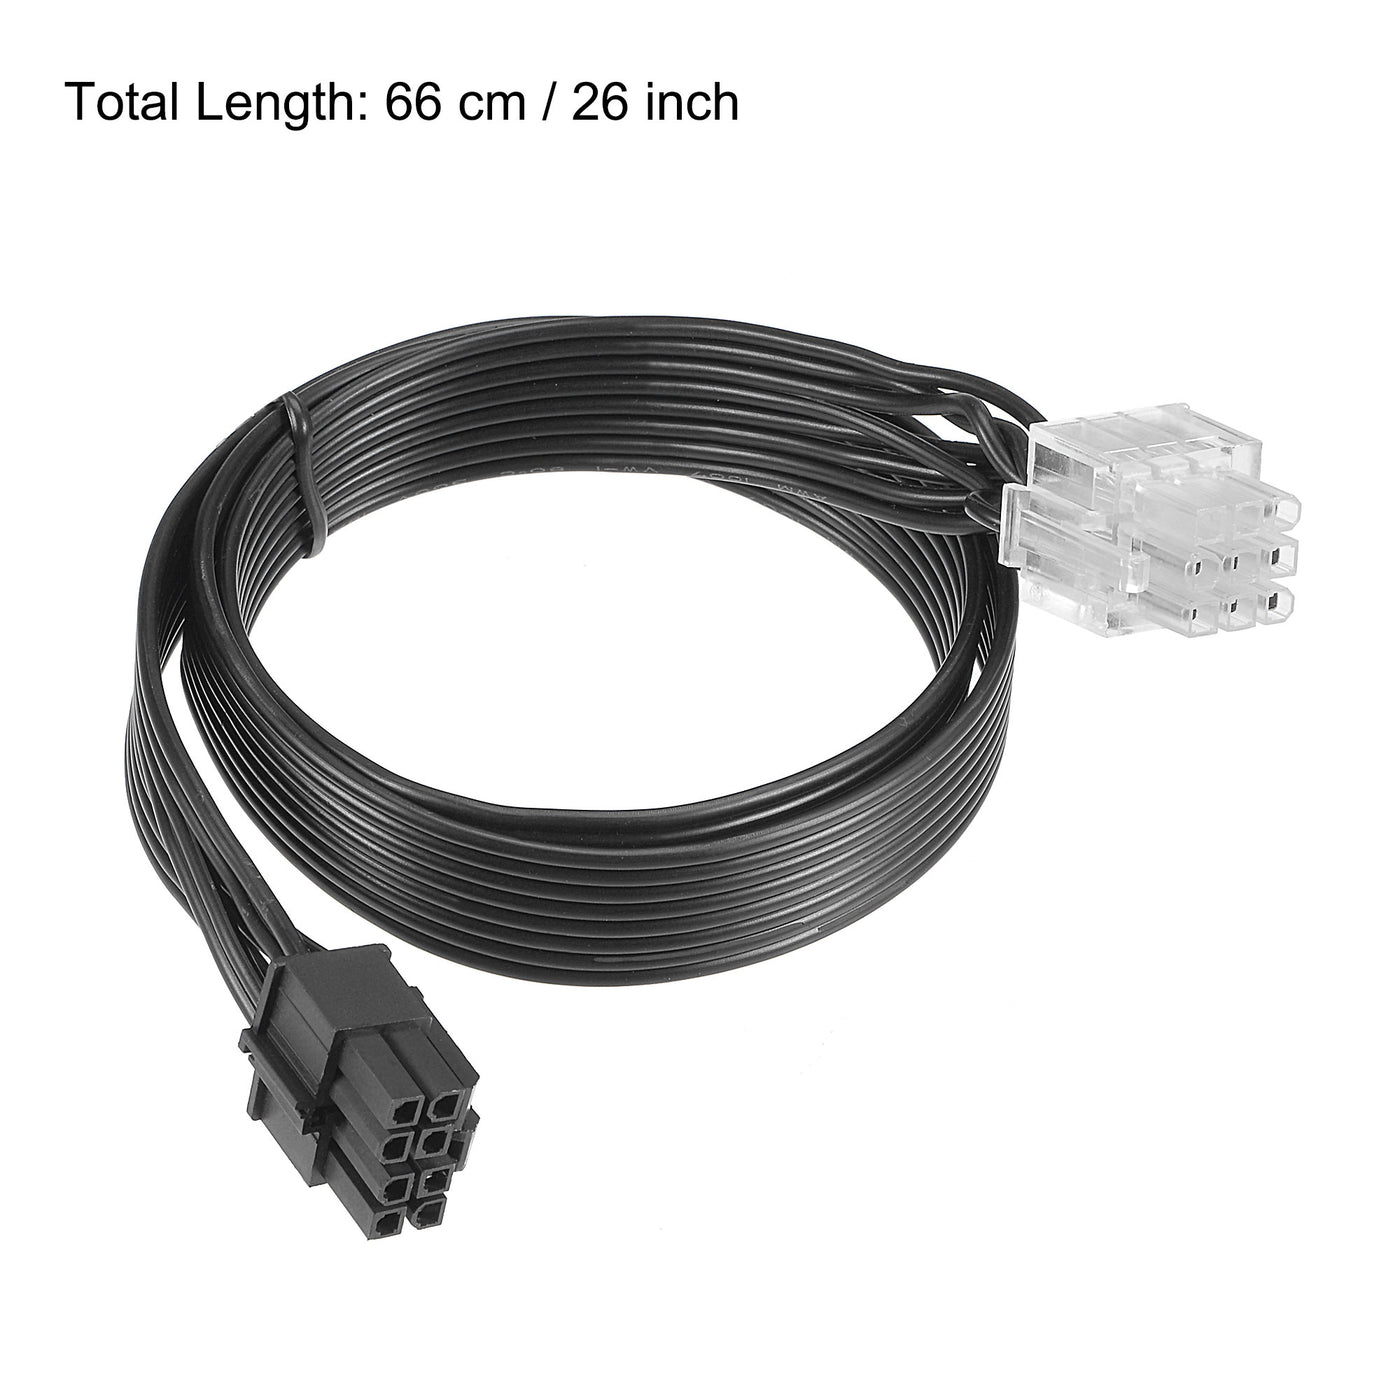 uxcell Uxcell Mainboard Power Cable for Video Card 9 Grid of PCIe 7 to 4 and 4 Pin 18 AWG 66cm